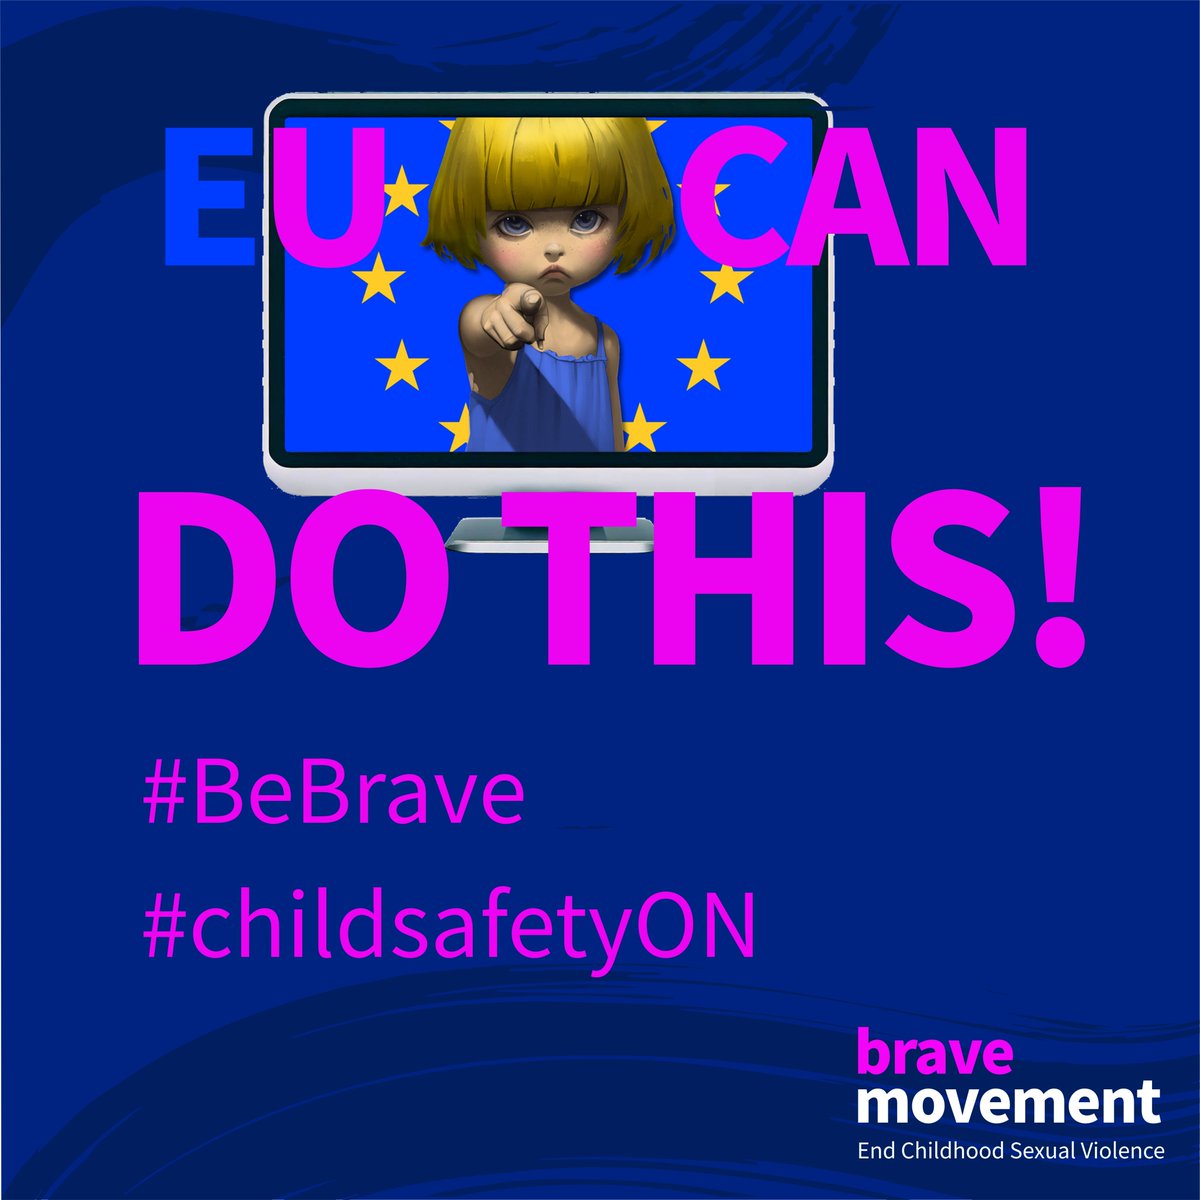 3 in every 5 reports of child sexual abuse material is hosted in an EU member state.🇪🇺

We call on the EU to support this vital piece of legislation #BeBraveEU #BeBrave #ChildSafetyON #EndChildhoodSexualViolence